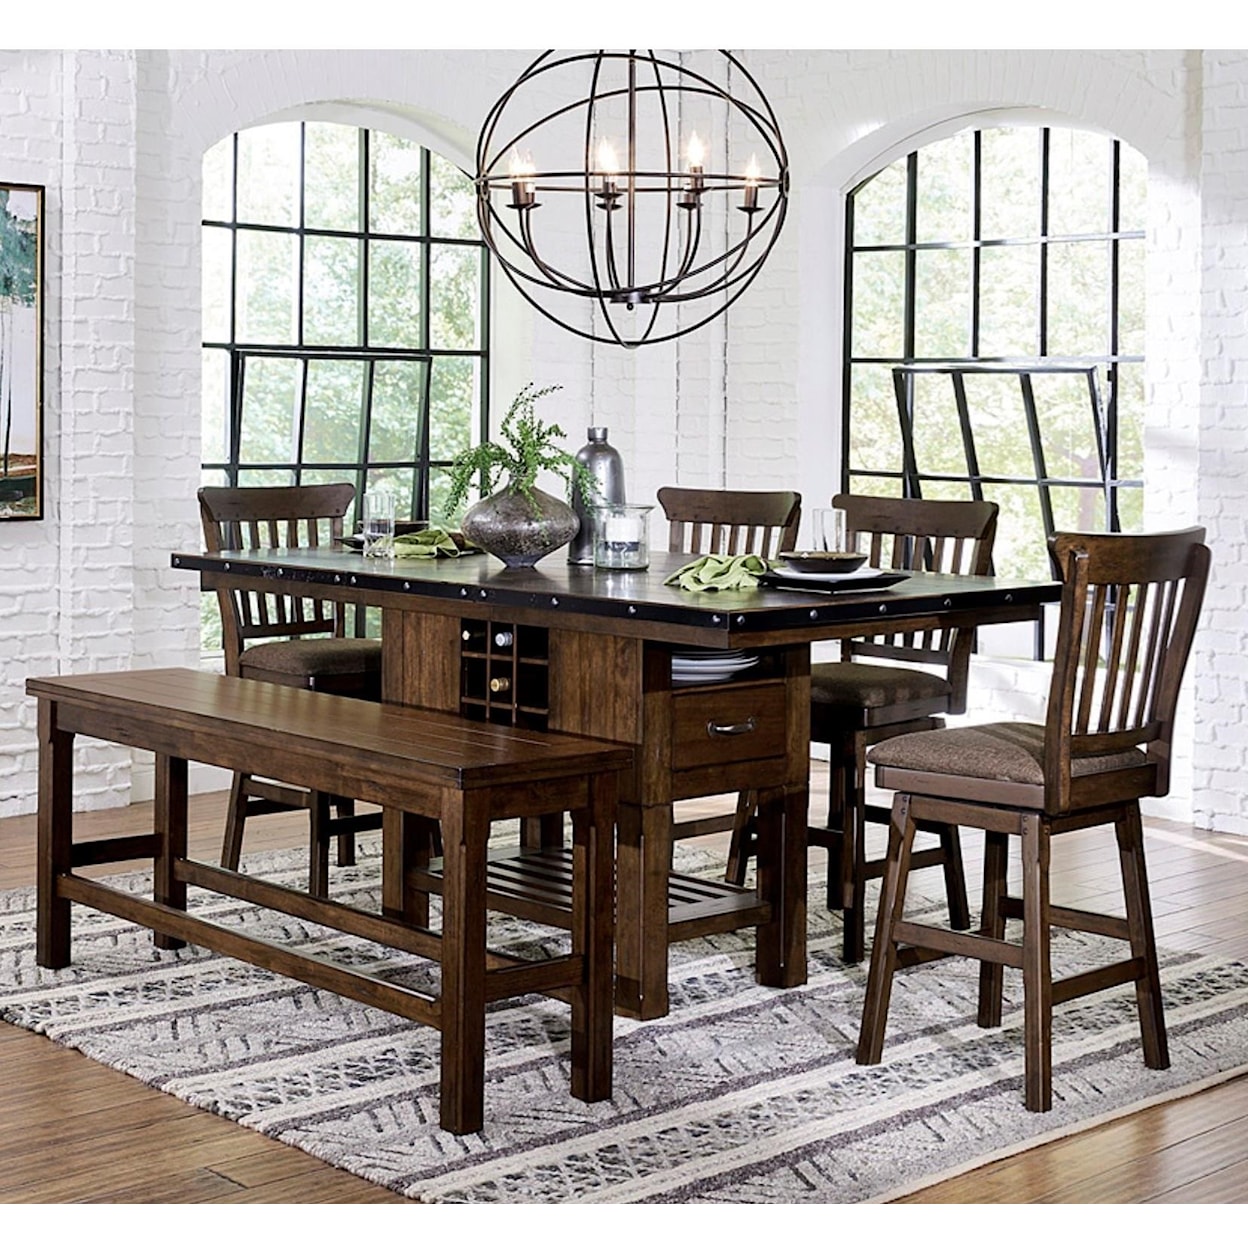 Homelegance Schleiger Table and Chair Set with Bench